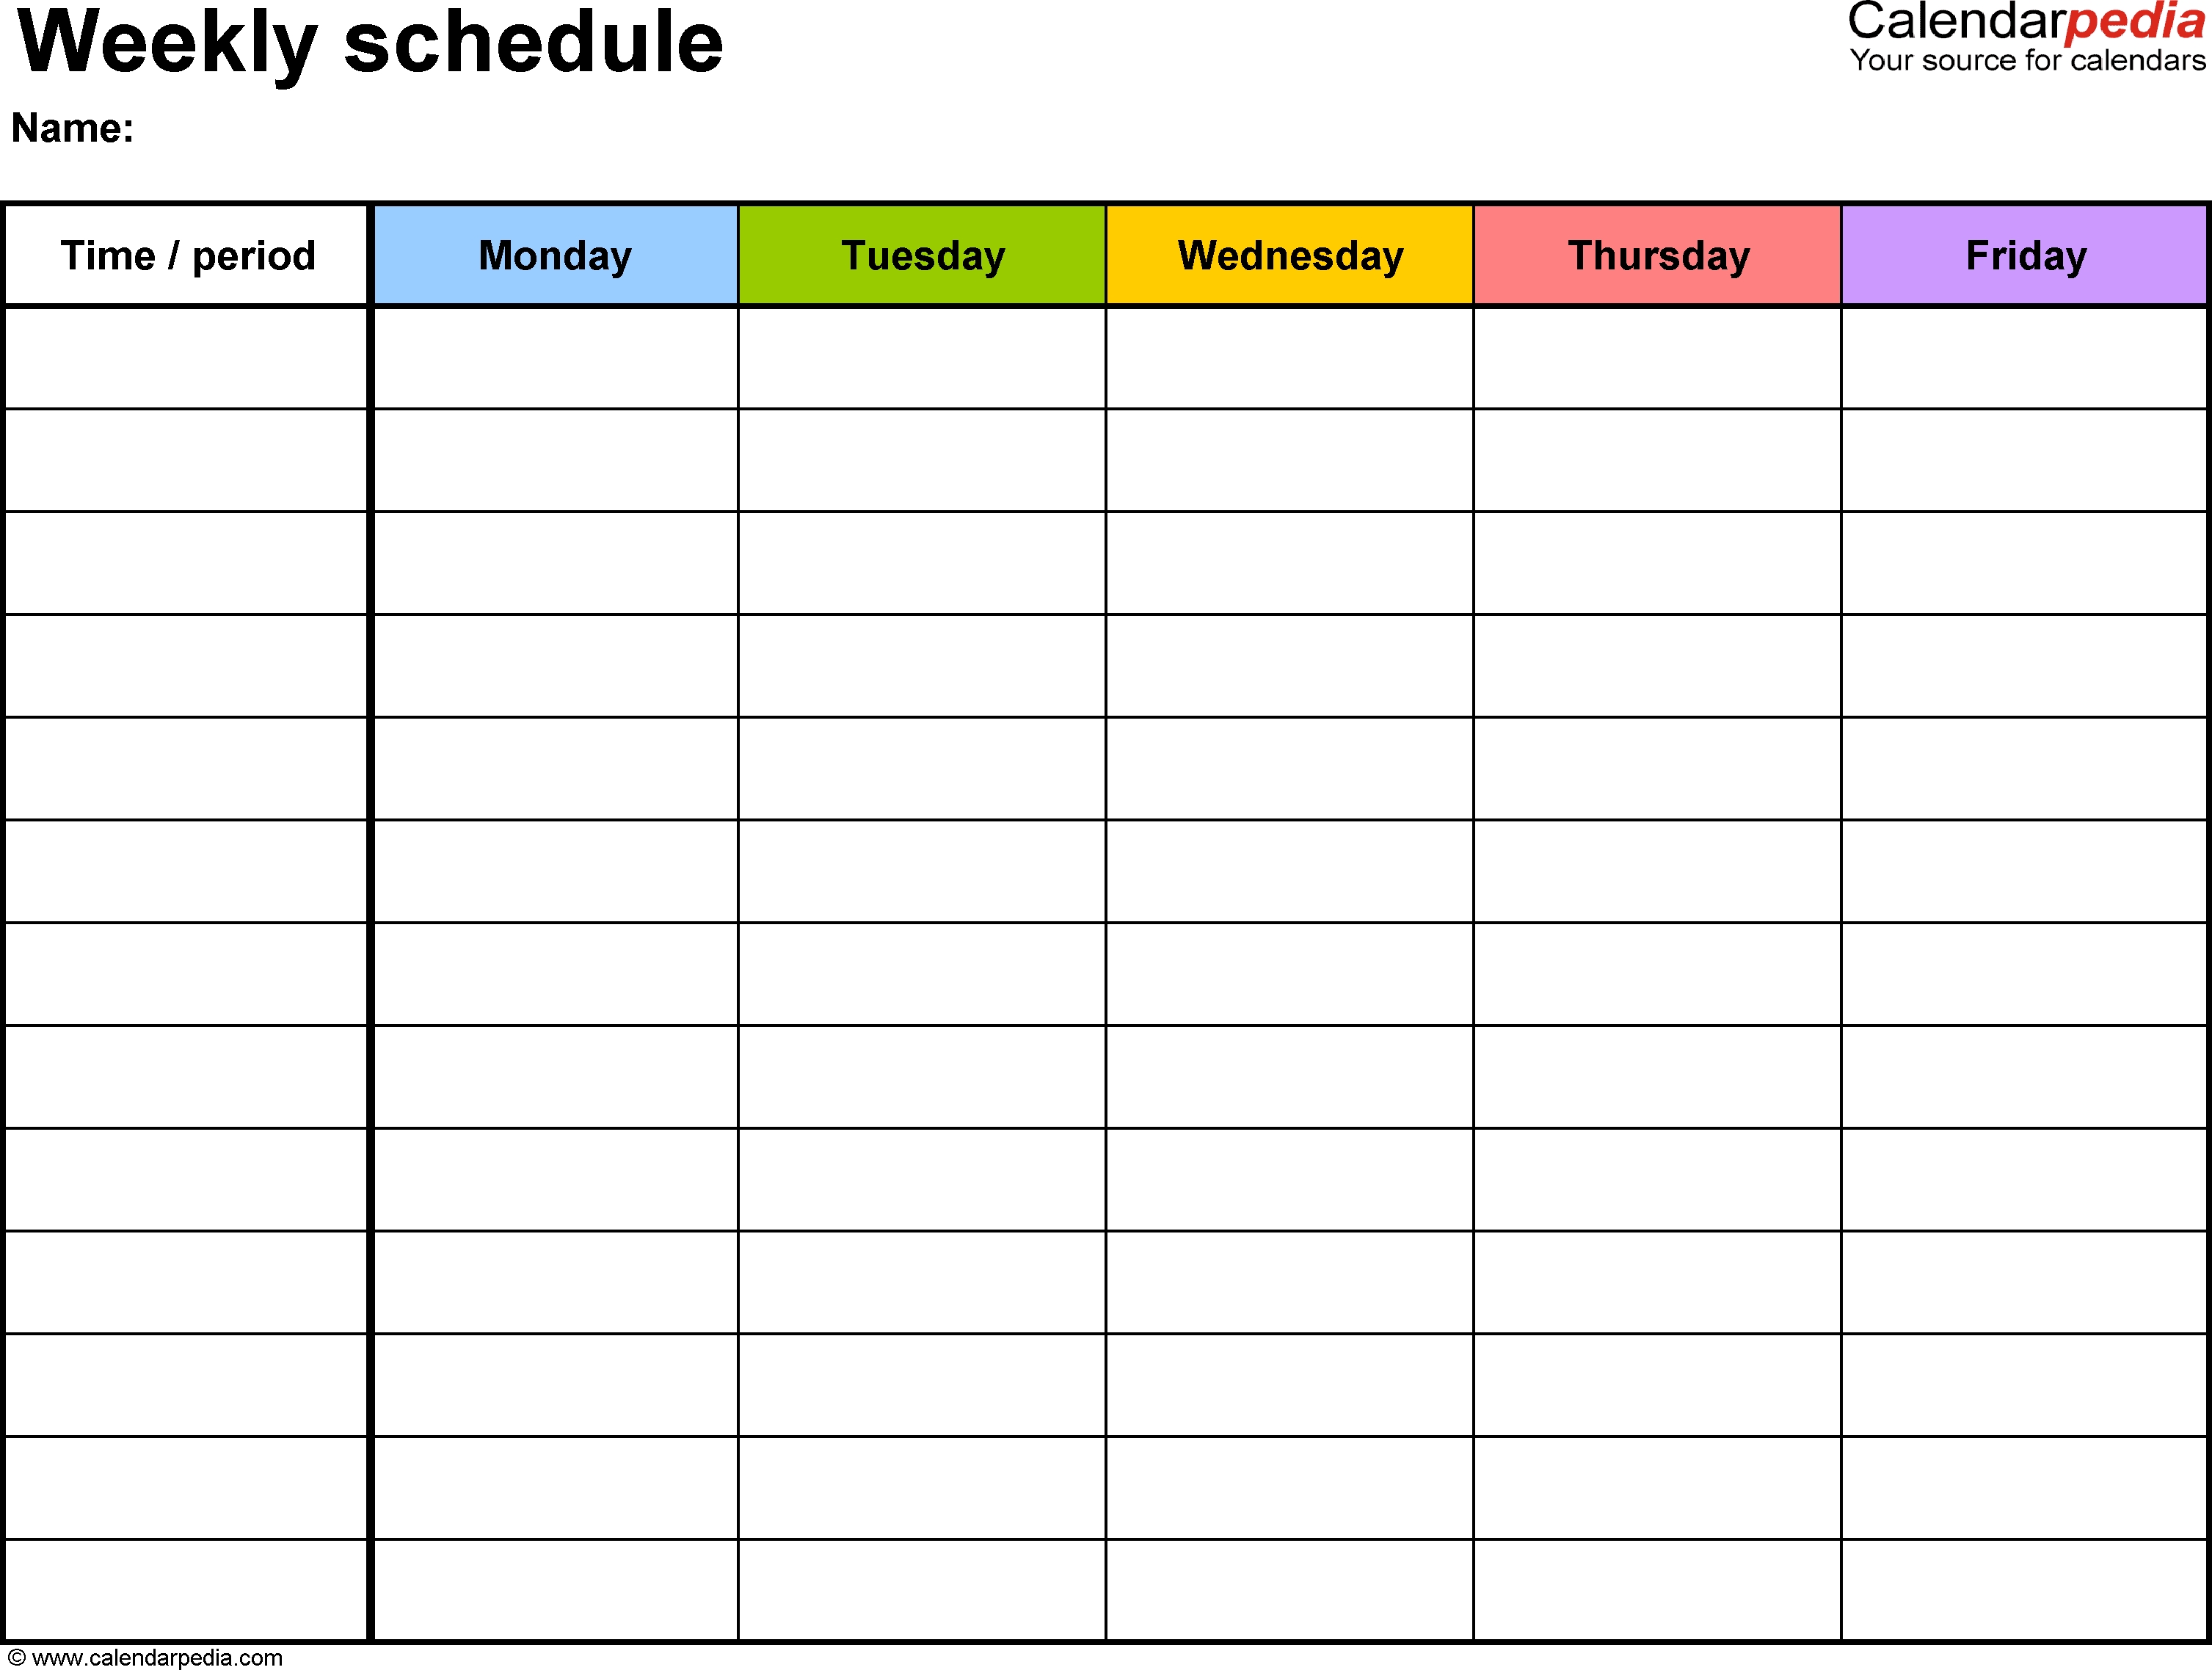 Free Weekly Schedule Templates For Word - 18 Templates in Weekly Calendar Template 5 Days